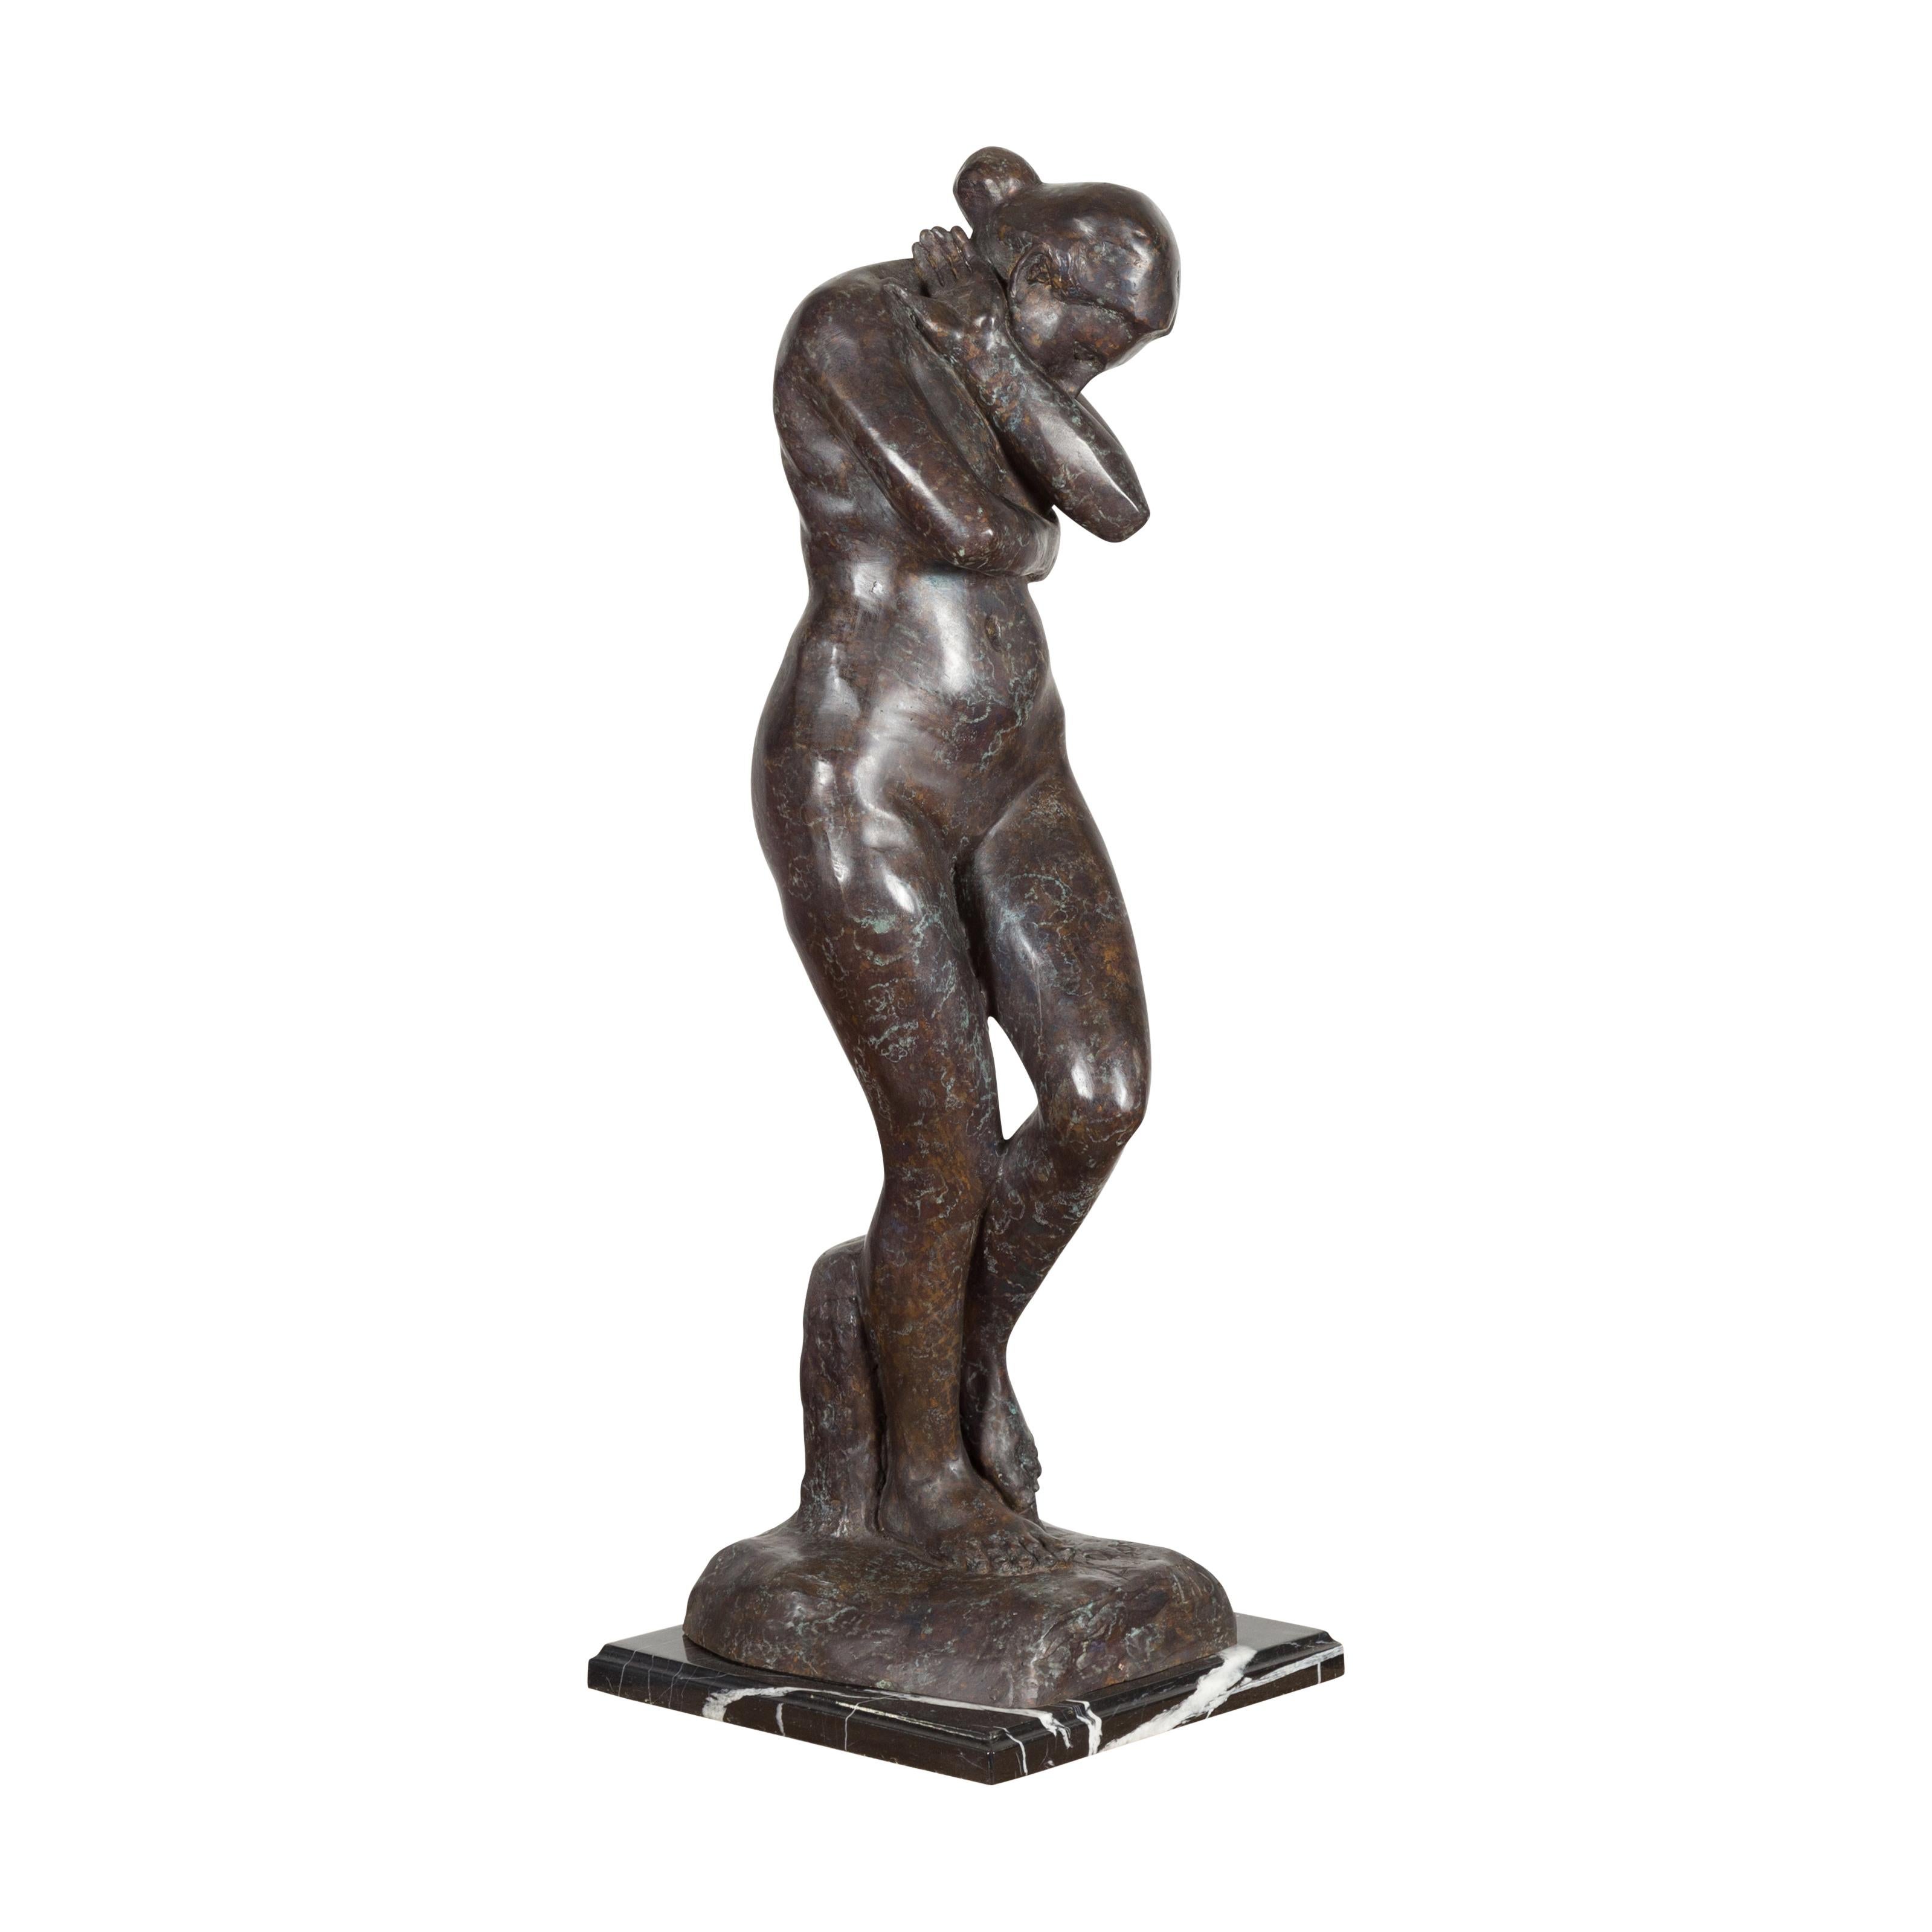 A lost wax cast bronze sculpture, inspired by Auguste Rodin's Eve in dark patina on black and white veined marble base. This item is available now and this is also a current production. Created with the traditional technique of the lost-wax (à la